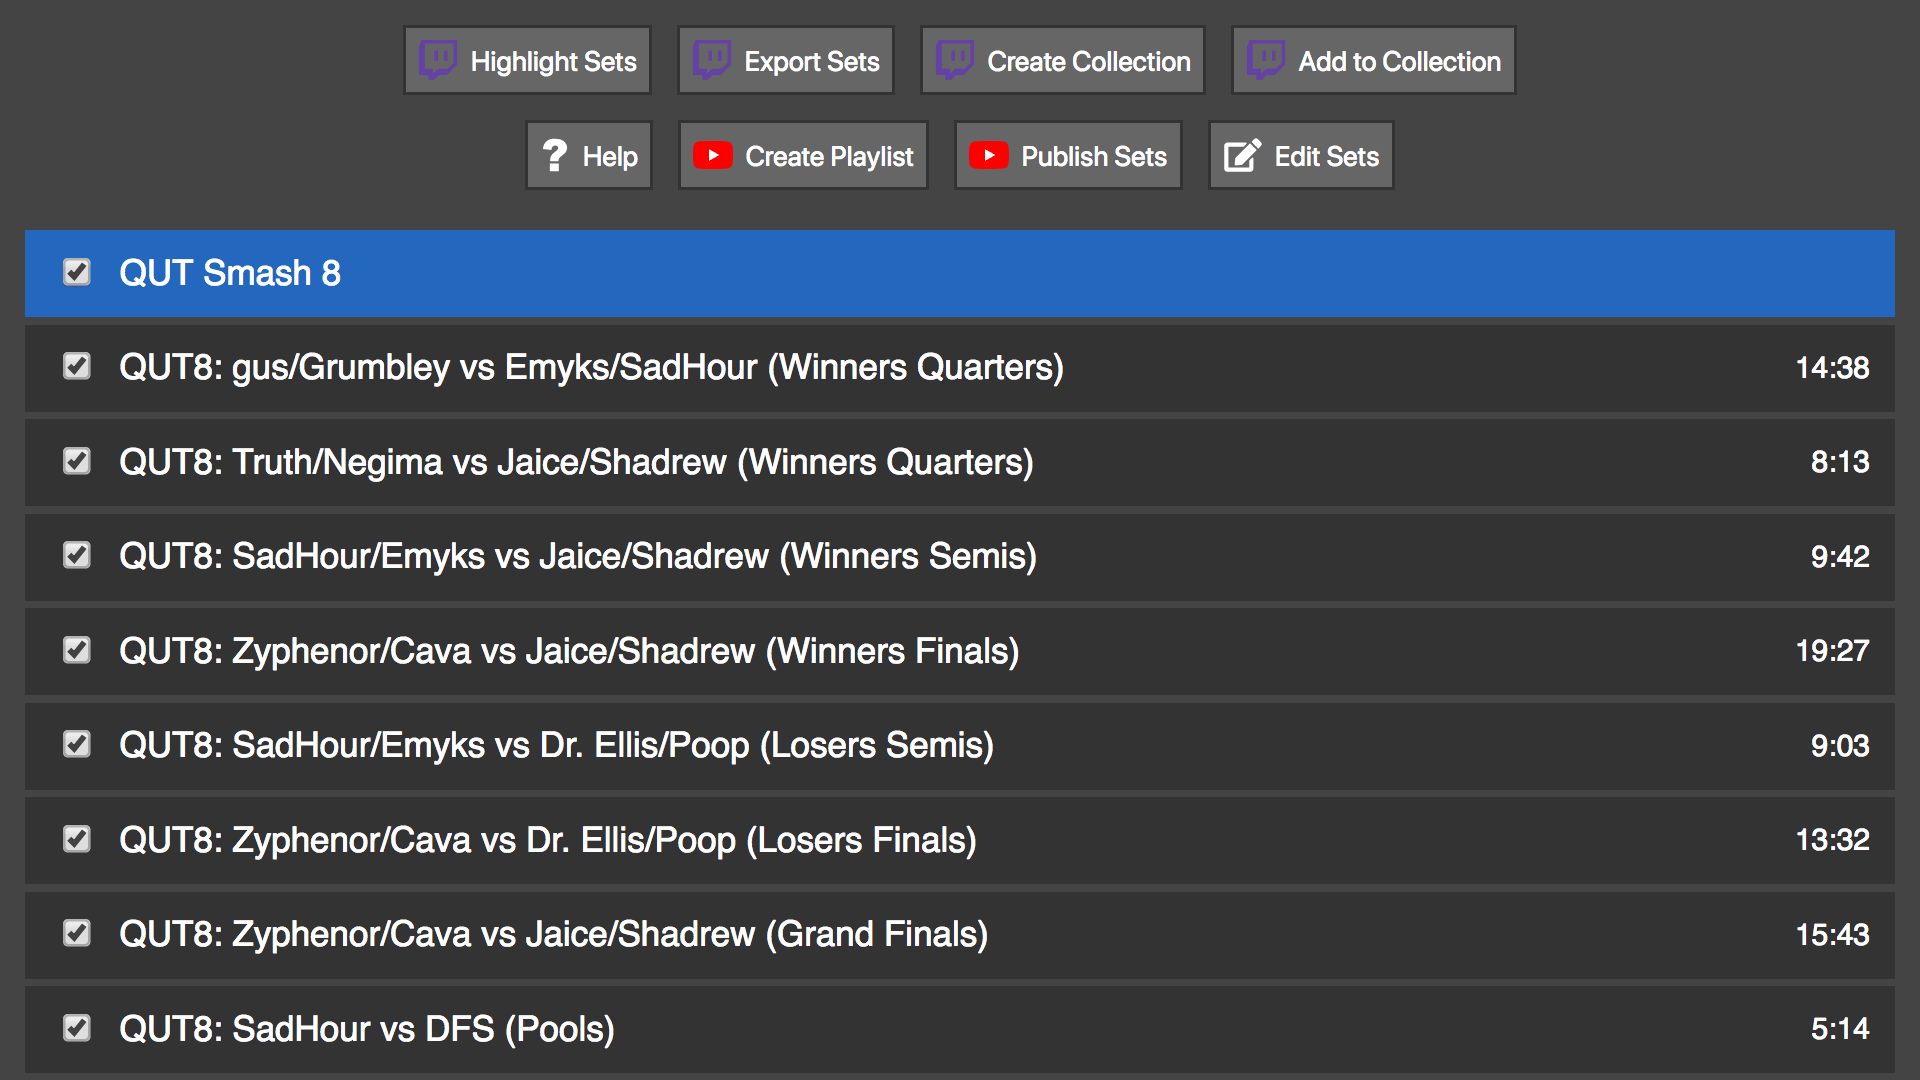 Streameta browser extension to split VODs into sets